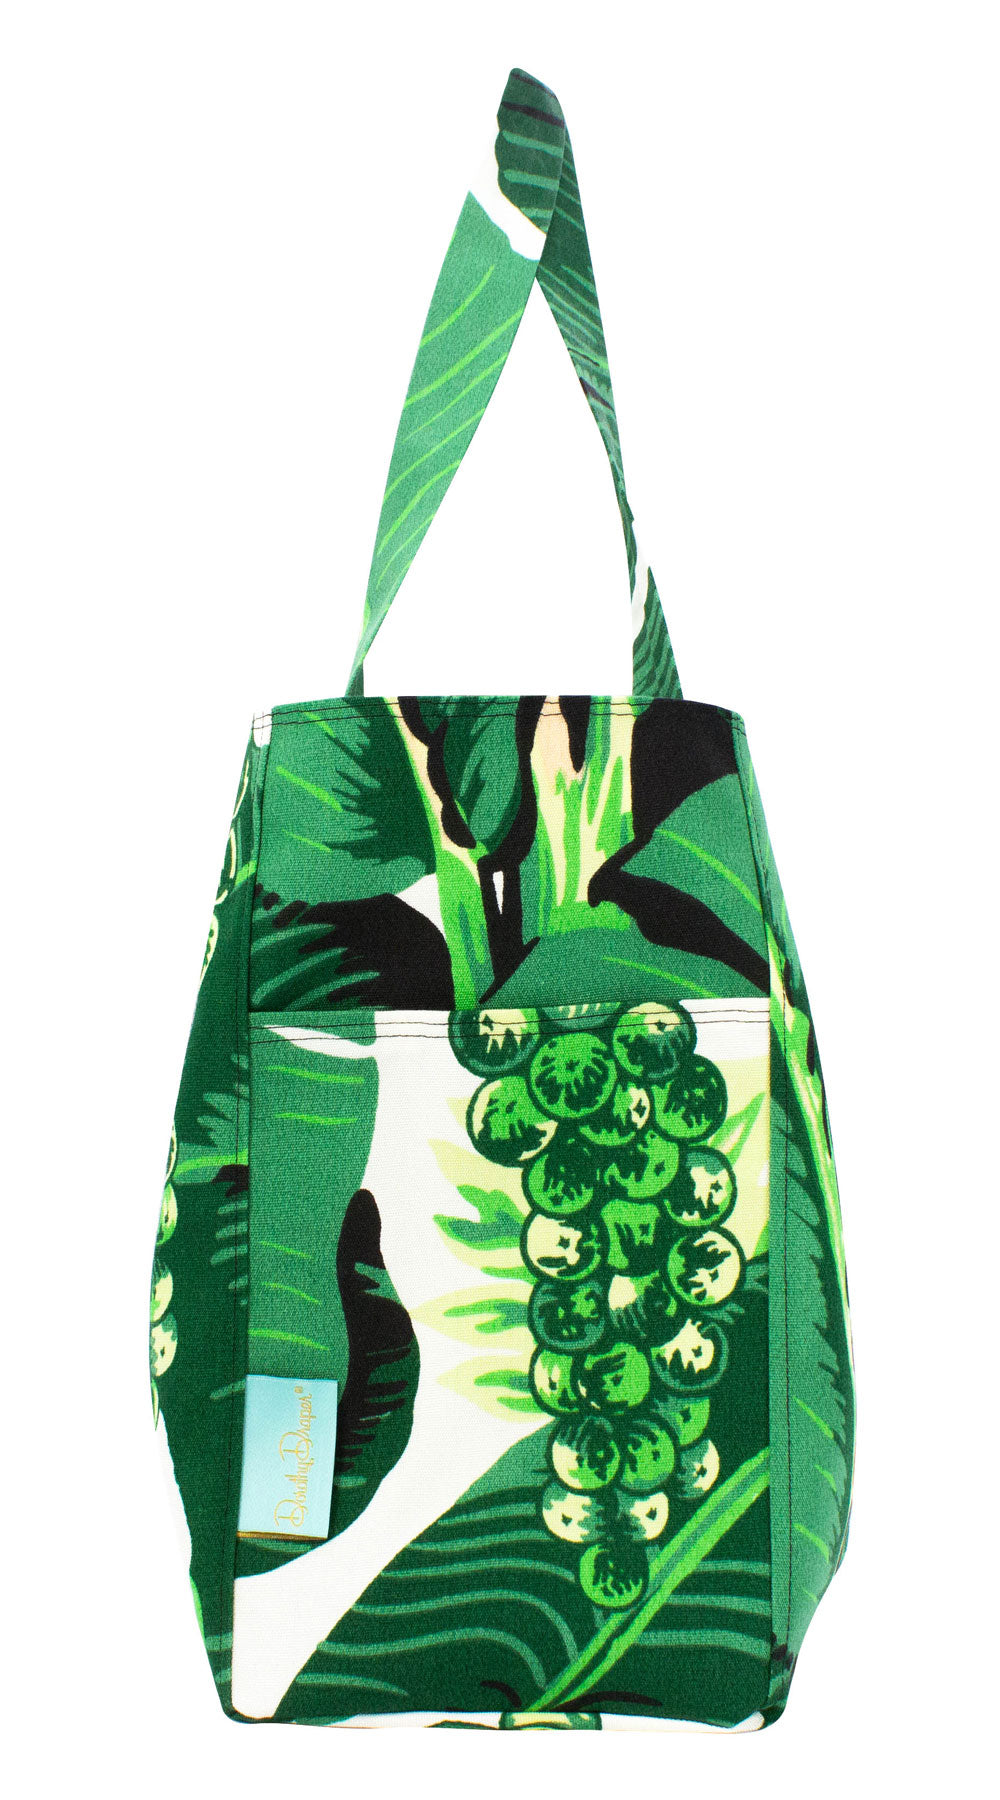 Boulevard Tote - Brazilliance  Currently Not Available